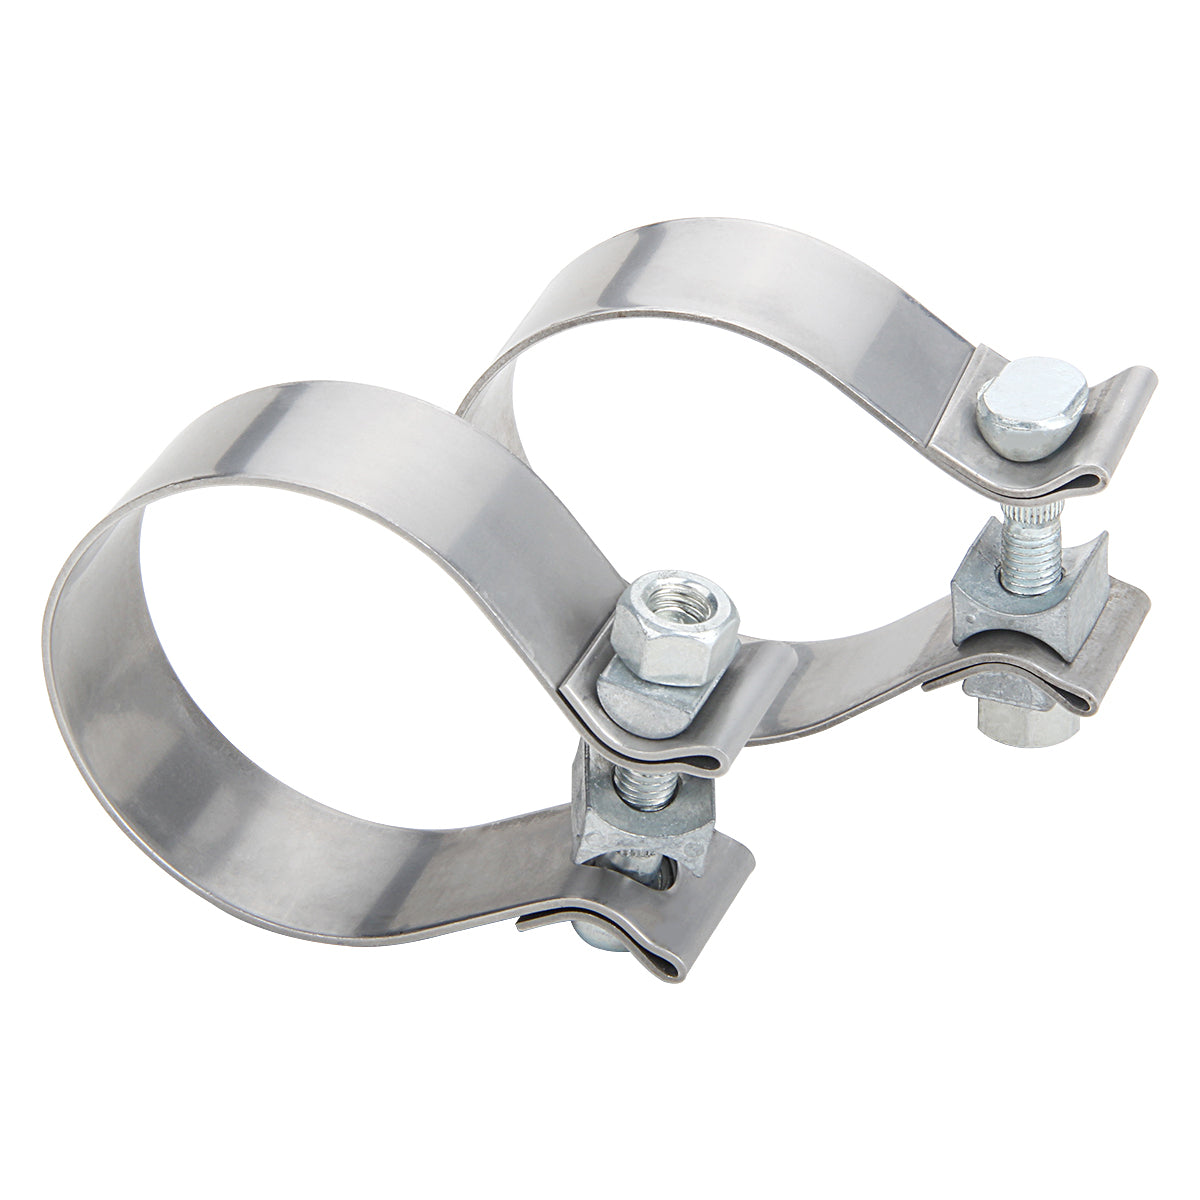 2.5" Stainless Steel Exhaust Clamp Sleeve Coupler